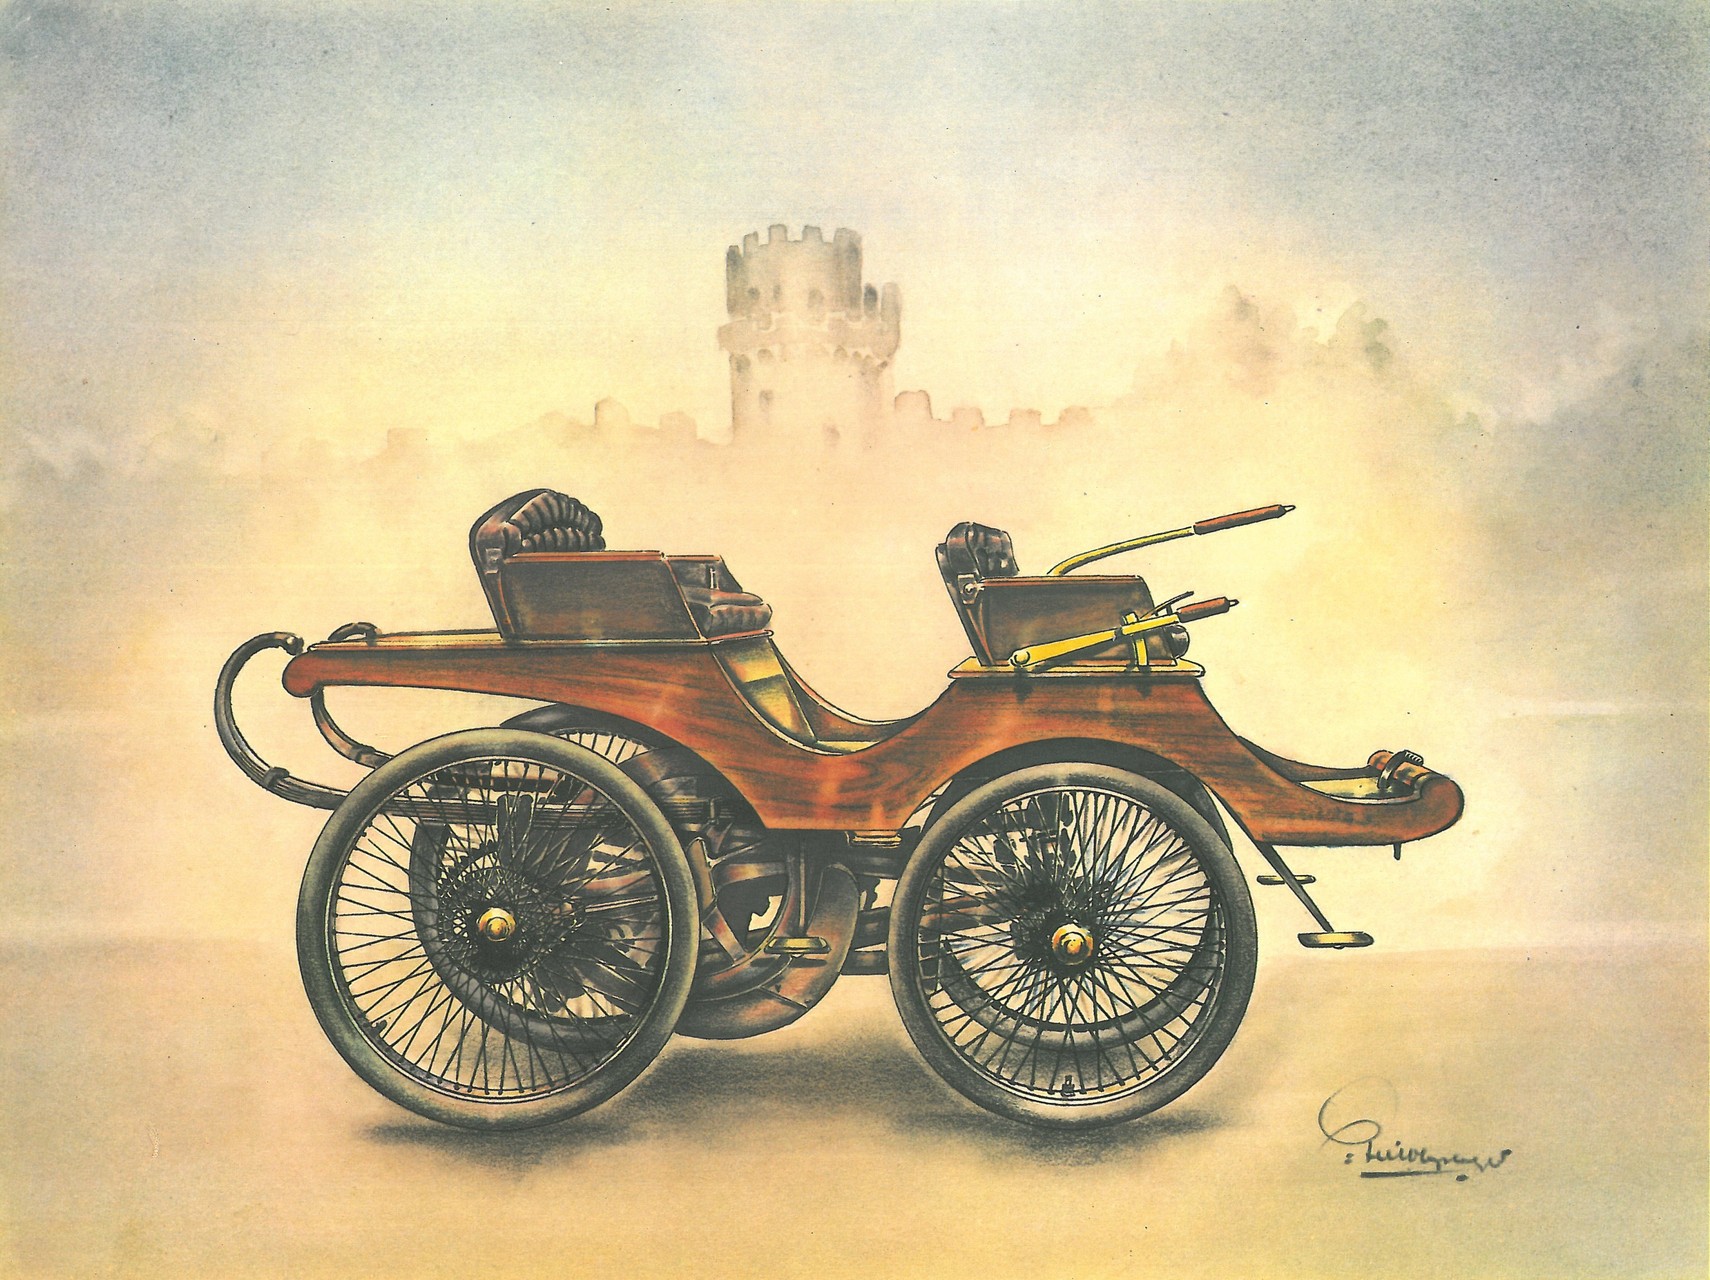 1895 Lanchester Phaeton: Illustrated by Piet Olyslager